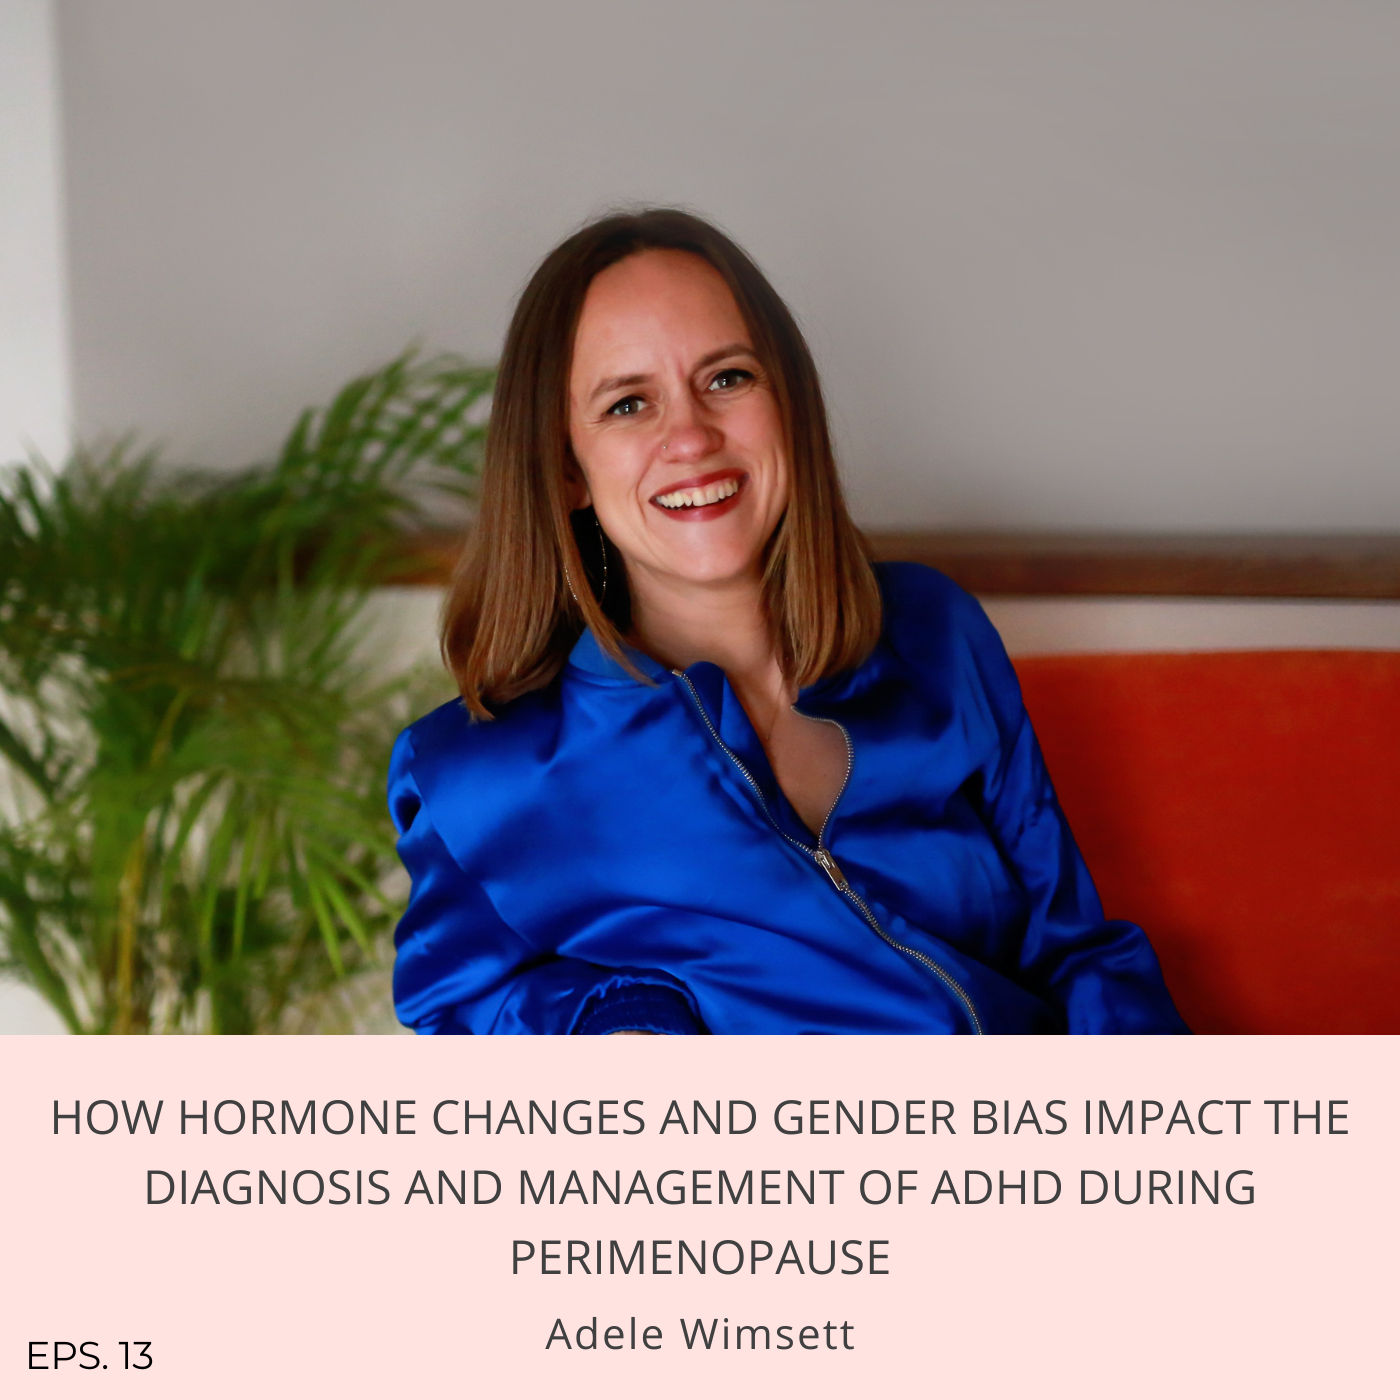 Episode 13: How hormone changes and gender bias impact the diagnosis and management of ADHD during perimenopause with Adele Wimsett